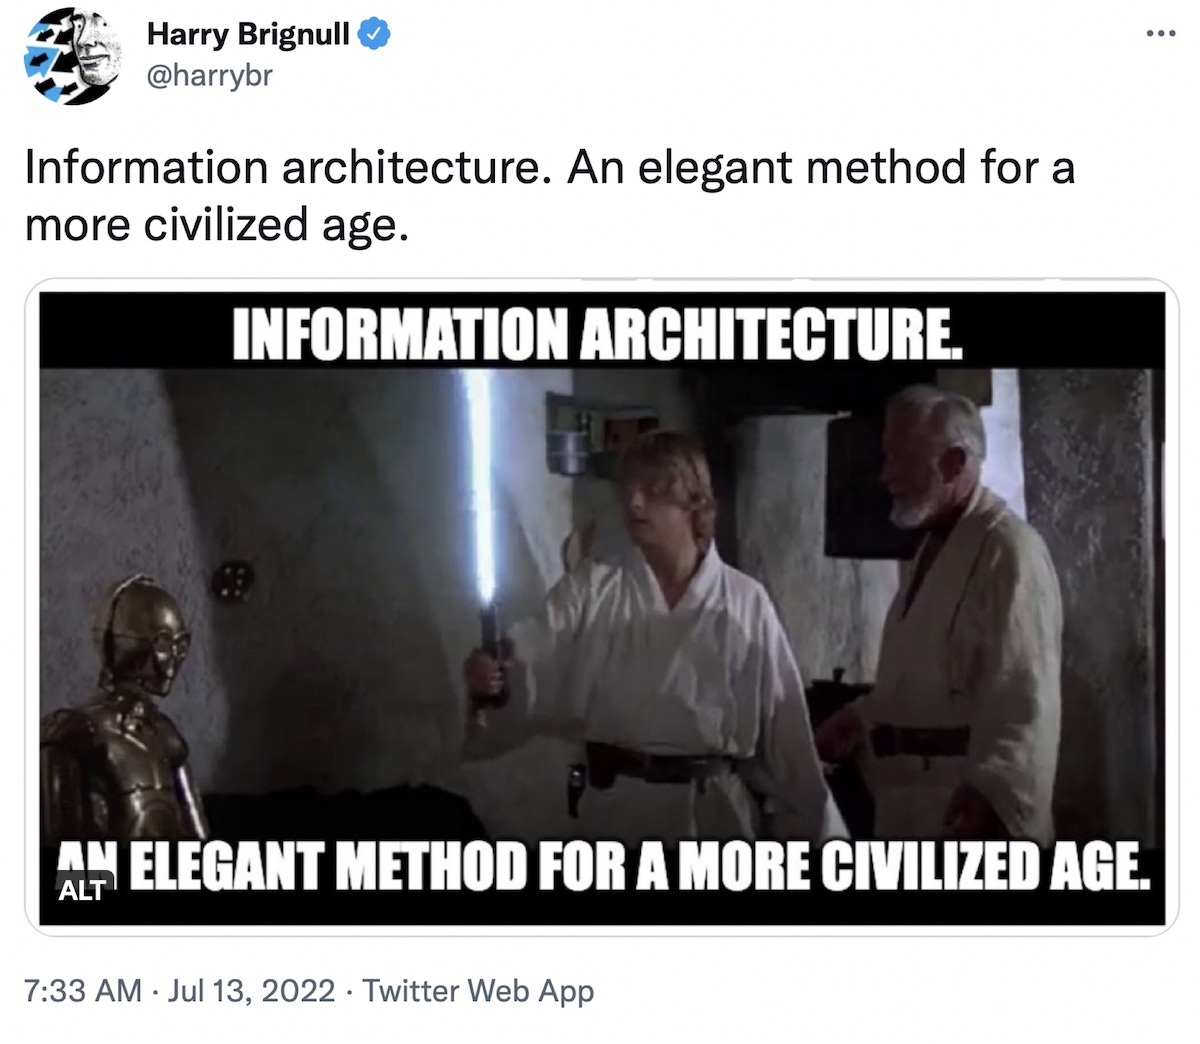 Screenshot of a tweet by Harry Brignull. It’s a meme that shows Obi Wan Kenobi training Luke Skywalker with a lightsaber. The meme says: ‘INFORMATION ARCHITECTURE. A MORE ELEGANT METHOD FOR A MORE CIVILIZED AGE.